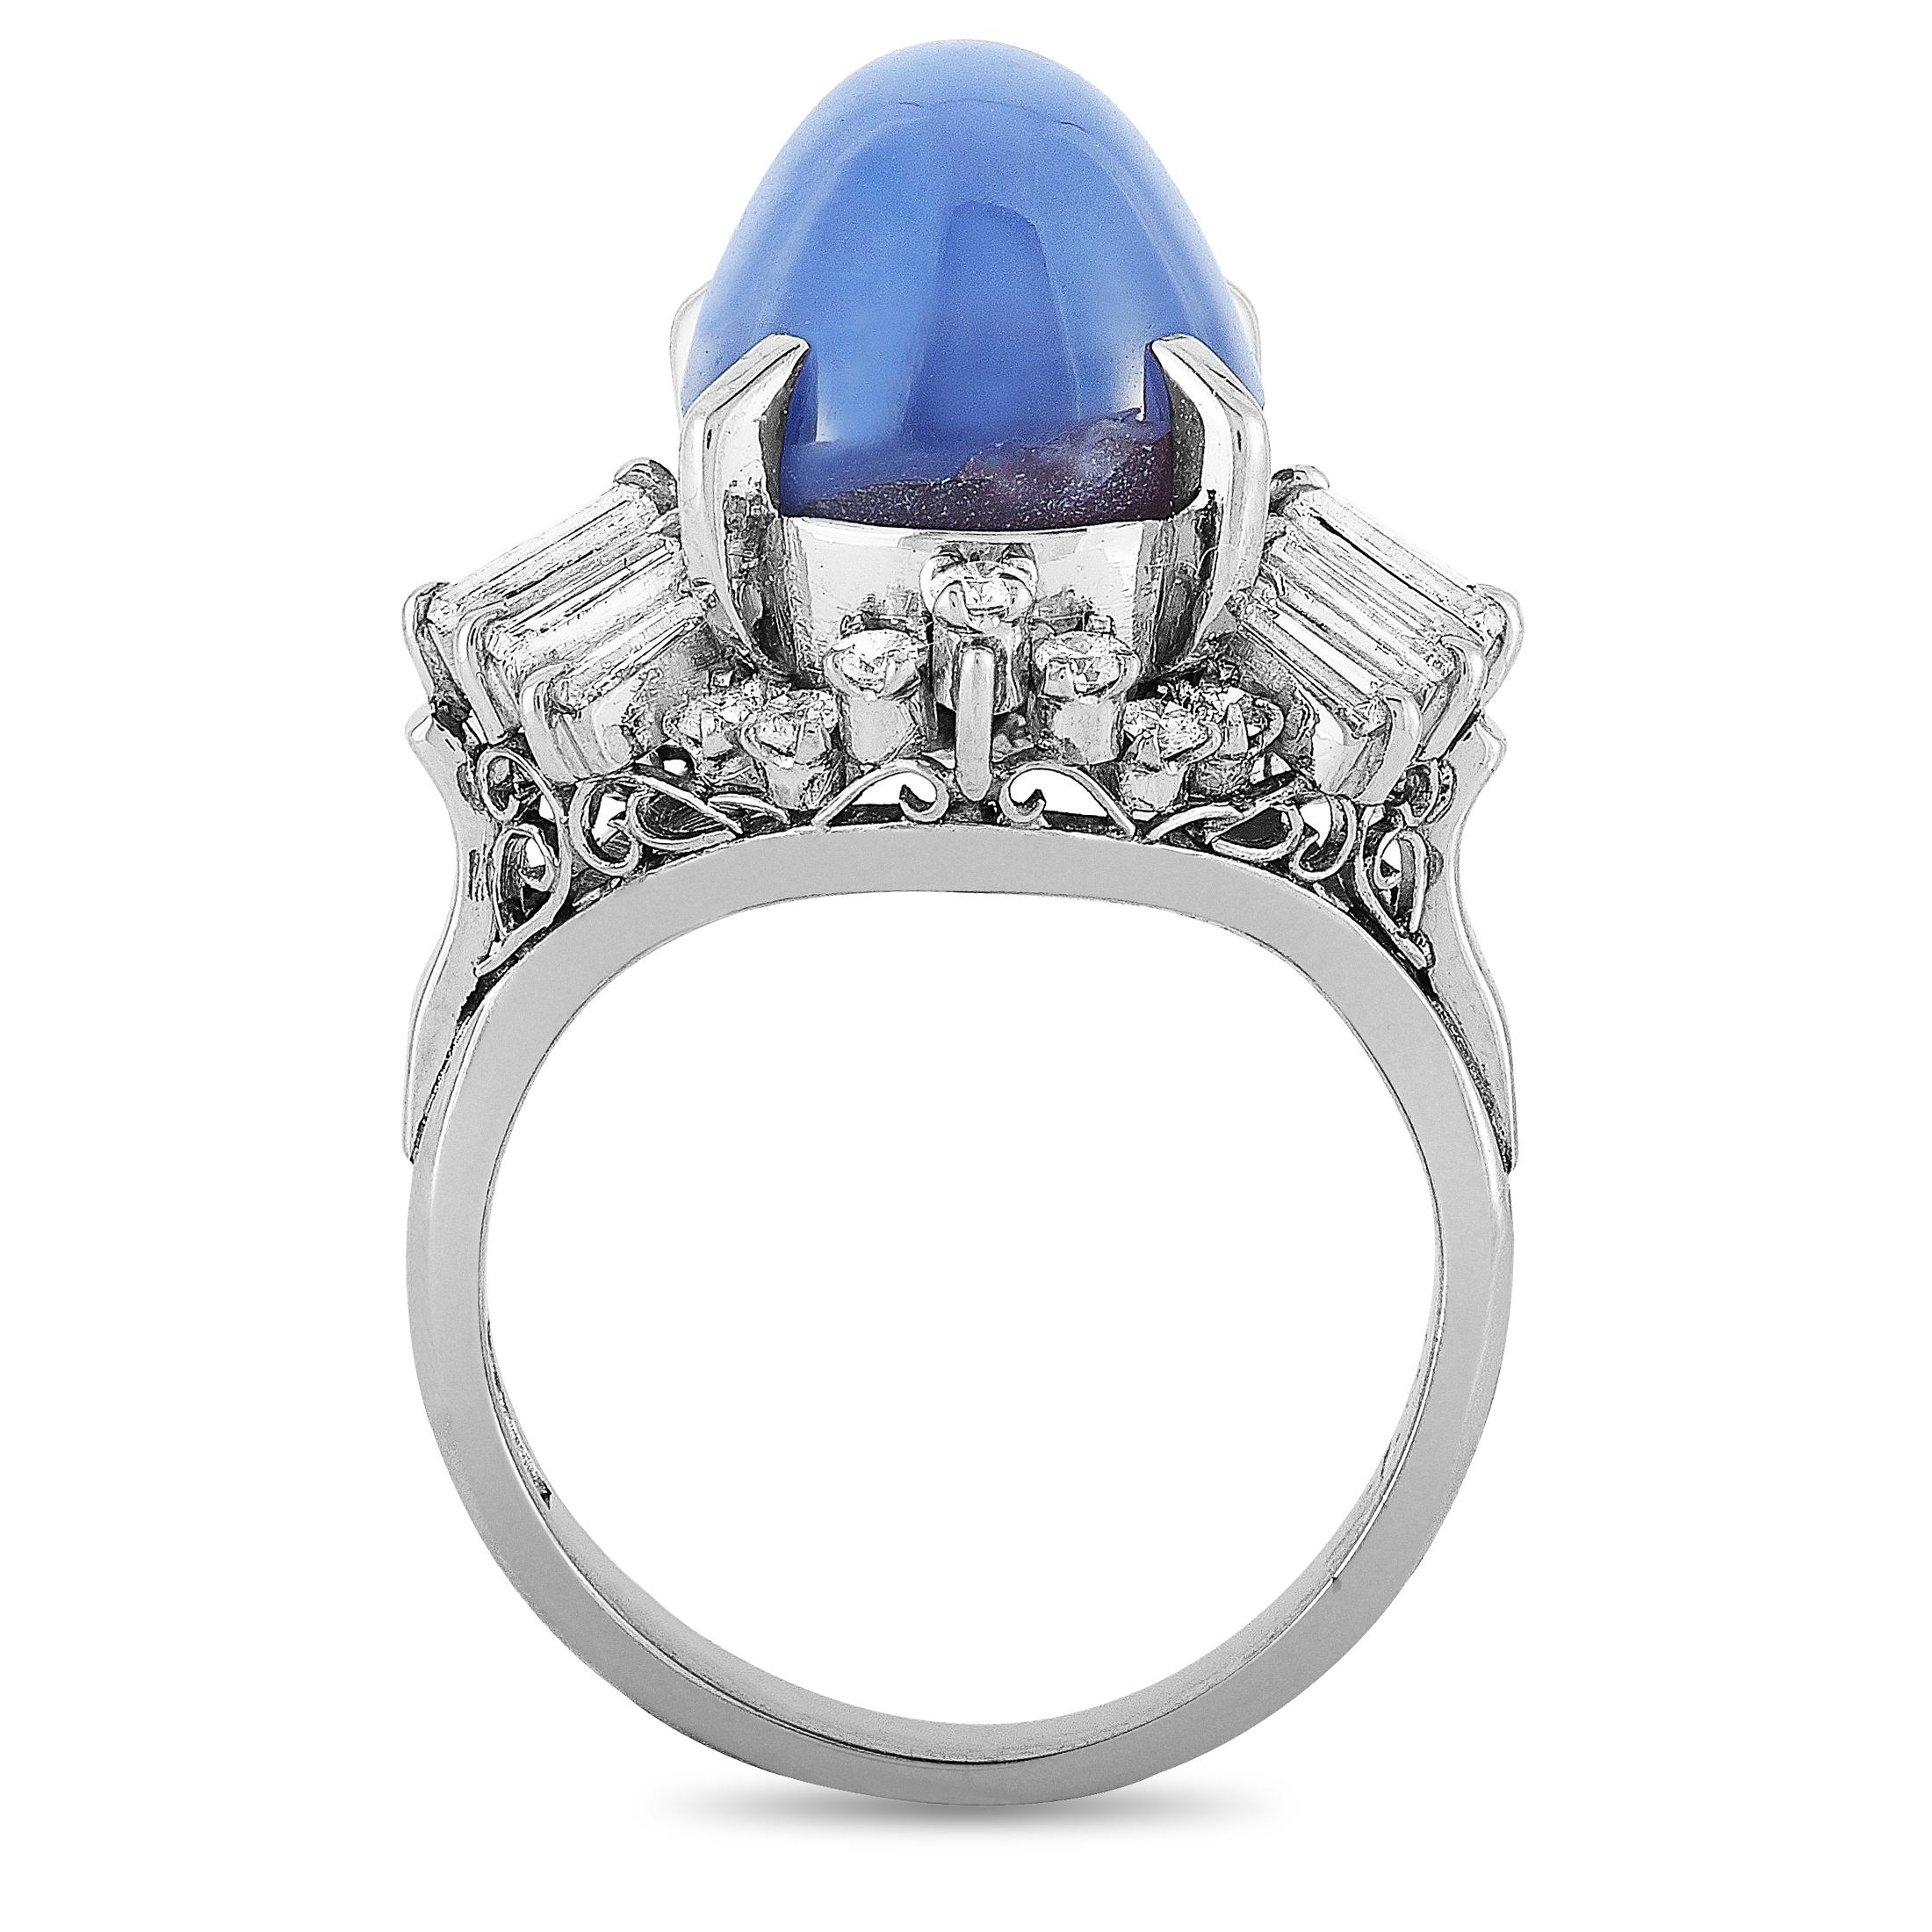 This LB Exclusive ring is made of platinum and embellished with a sapphire that weighs 9.57 carats and a total of 0.78 carats of diamonds. The ring weighs 8.9 grams and boasts band thickness of 3 mm and top height of 13 mm, while top dimensions